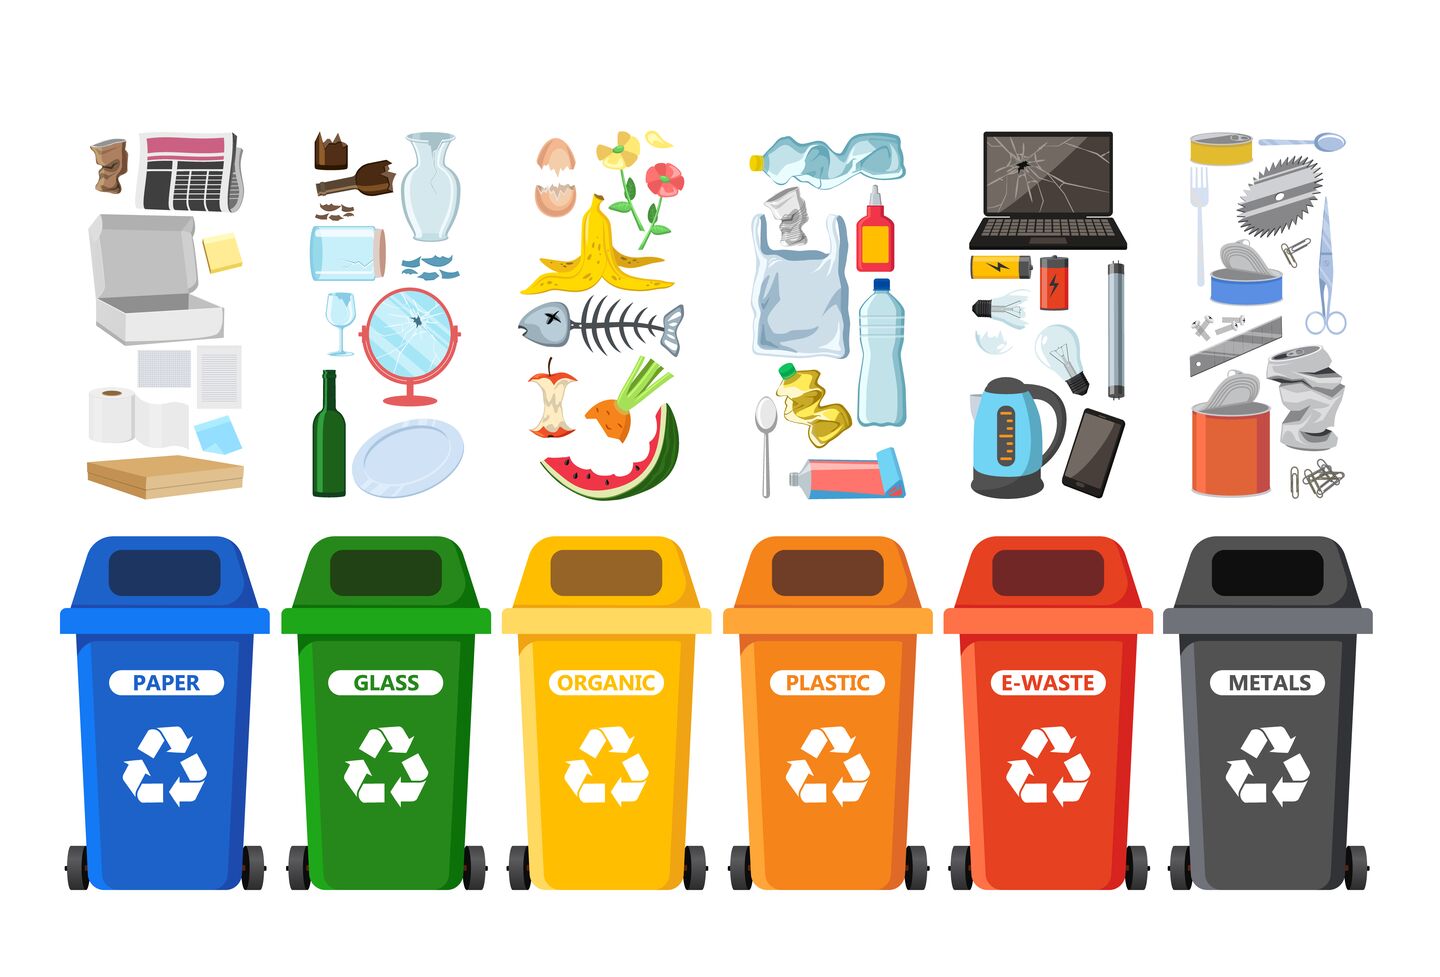 Rubbish bins for recycling different types of waste. Garbage containers for trash sorted by plastic, organic, e-waste, metal, glass, paper. Vector illustration